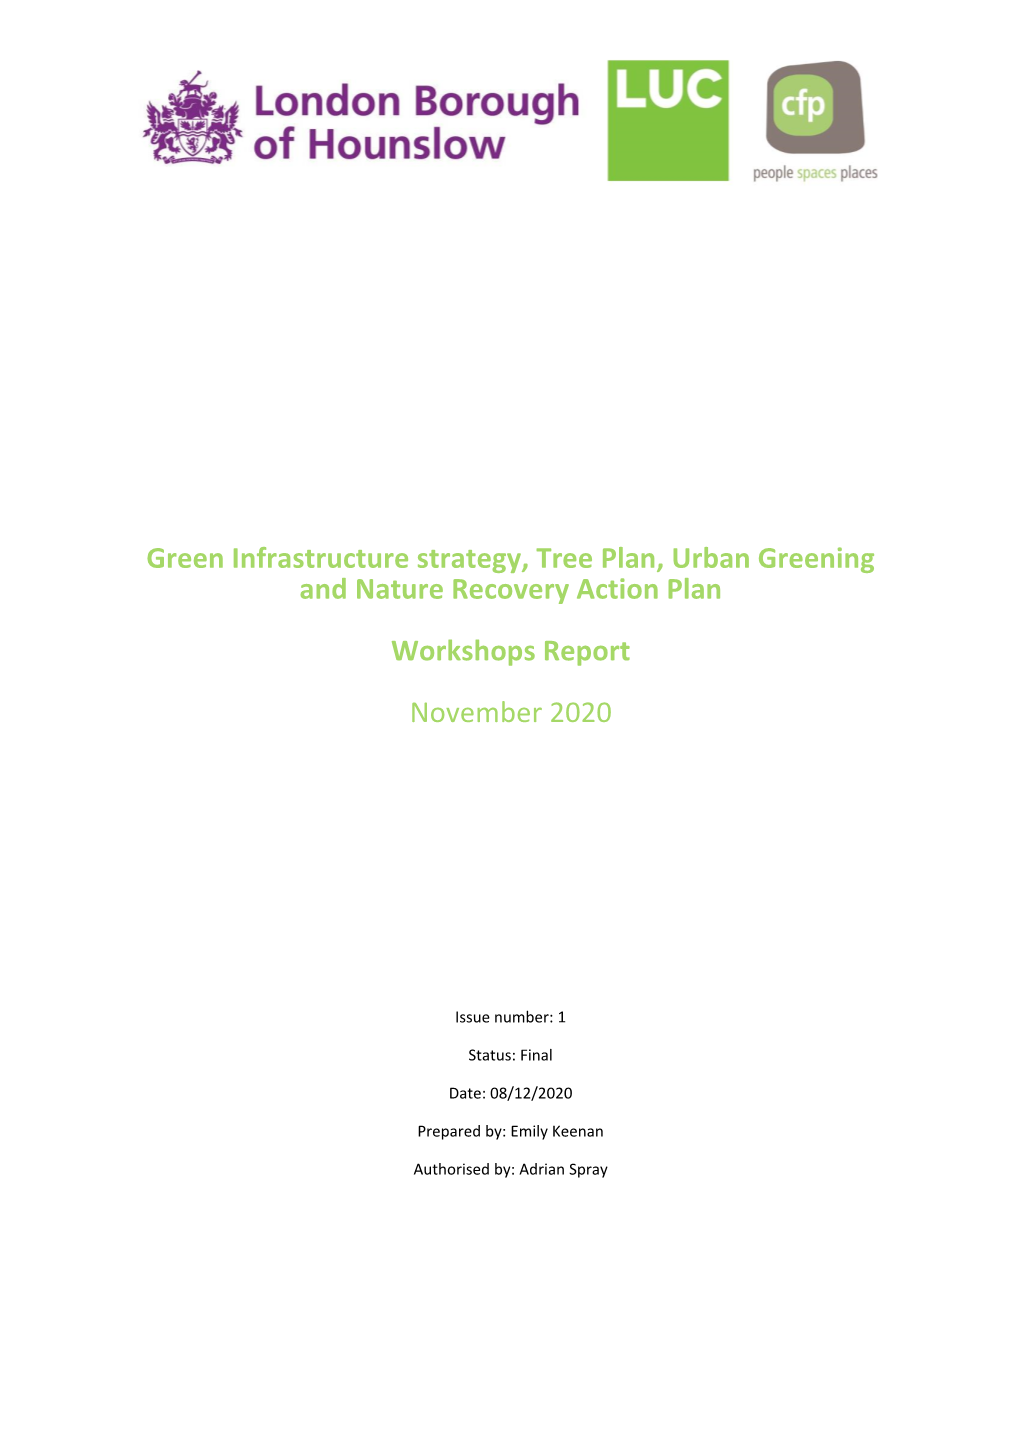 Green Infrastructure Strategy, Tree Plan, Urban Greening and Nature Recovery Action Plan Workshops Report November 2020